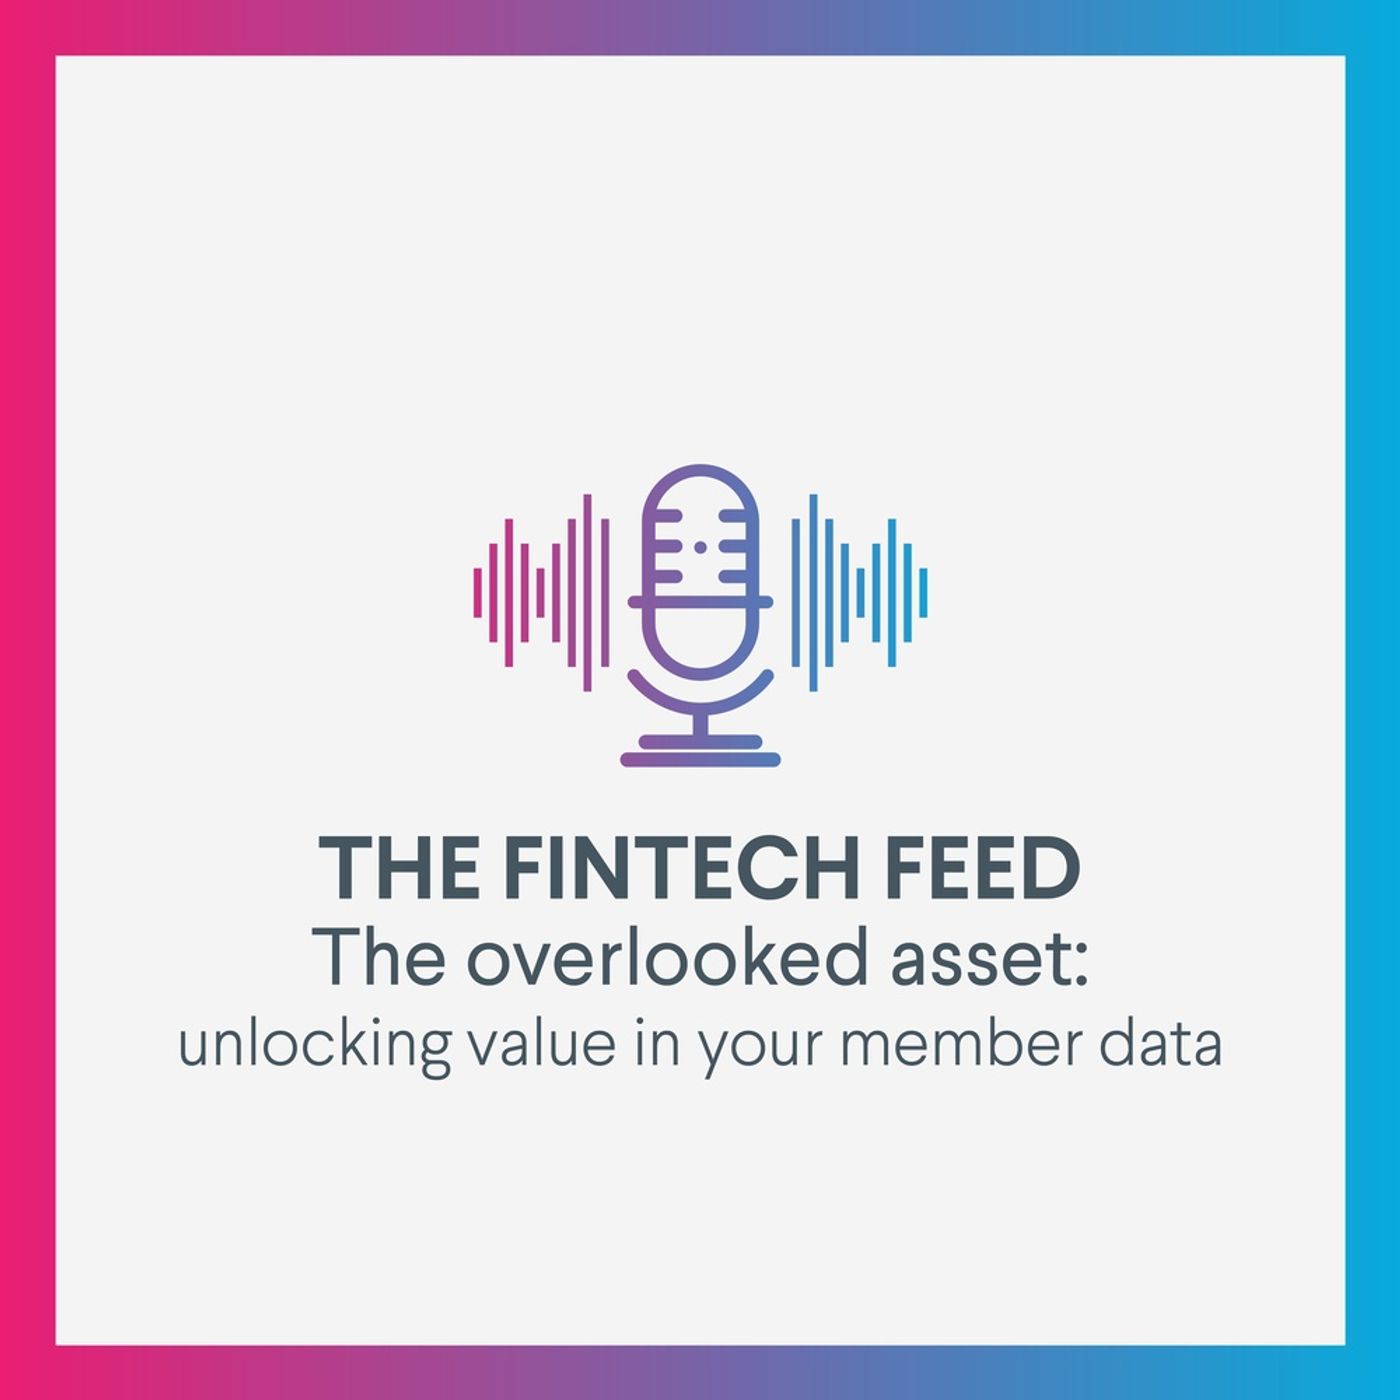 Fintech Feed - The overlooked asset : unlocking value in your member data